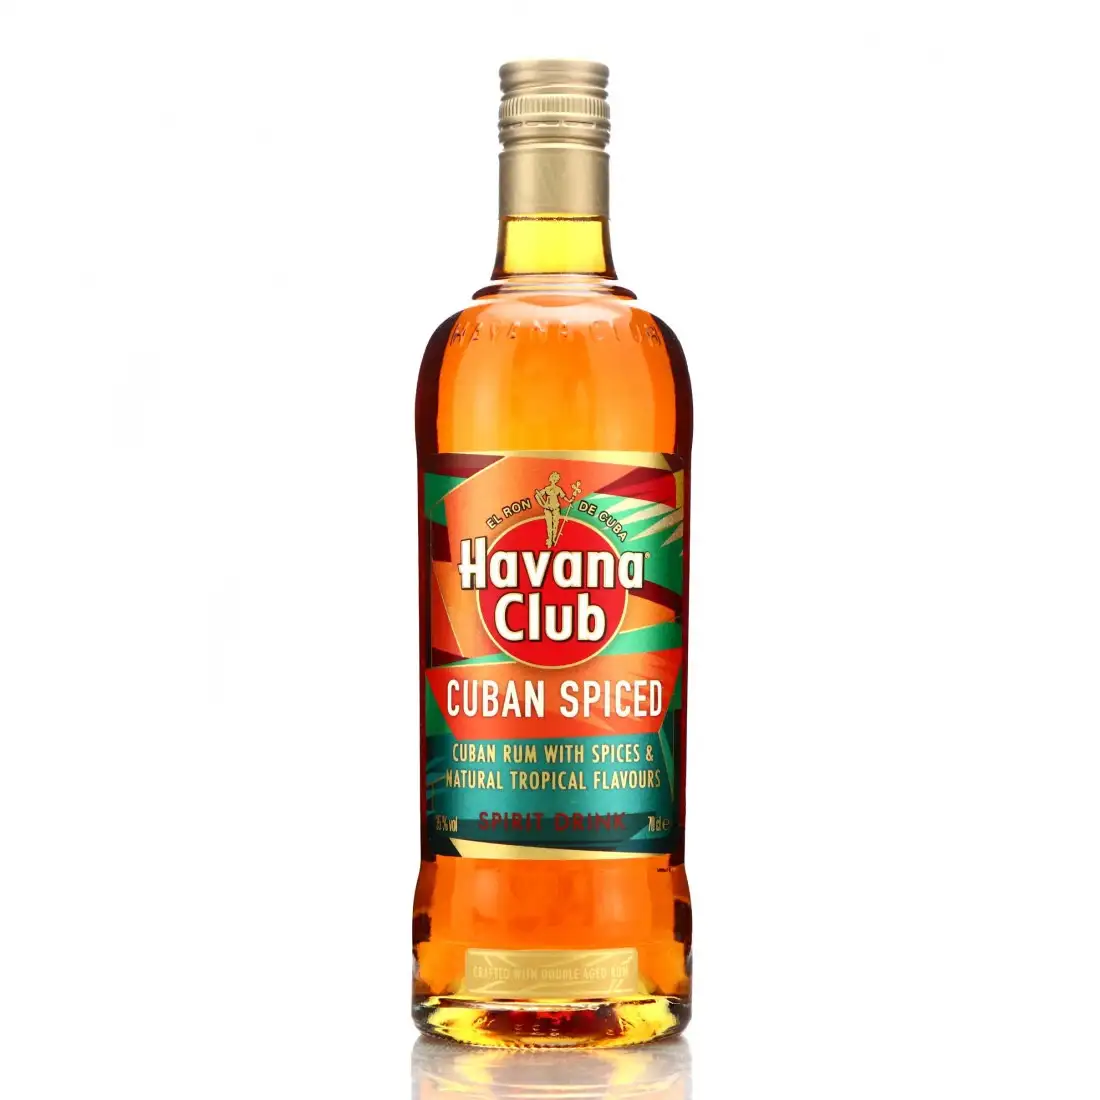 Image of the front of the bottle of the rum Cuban Spiced